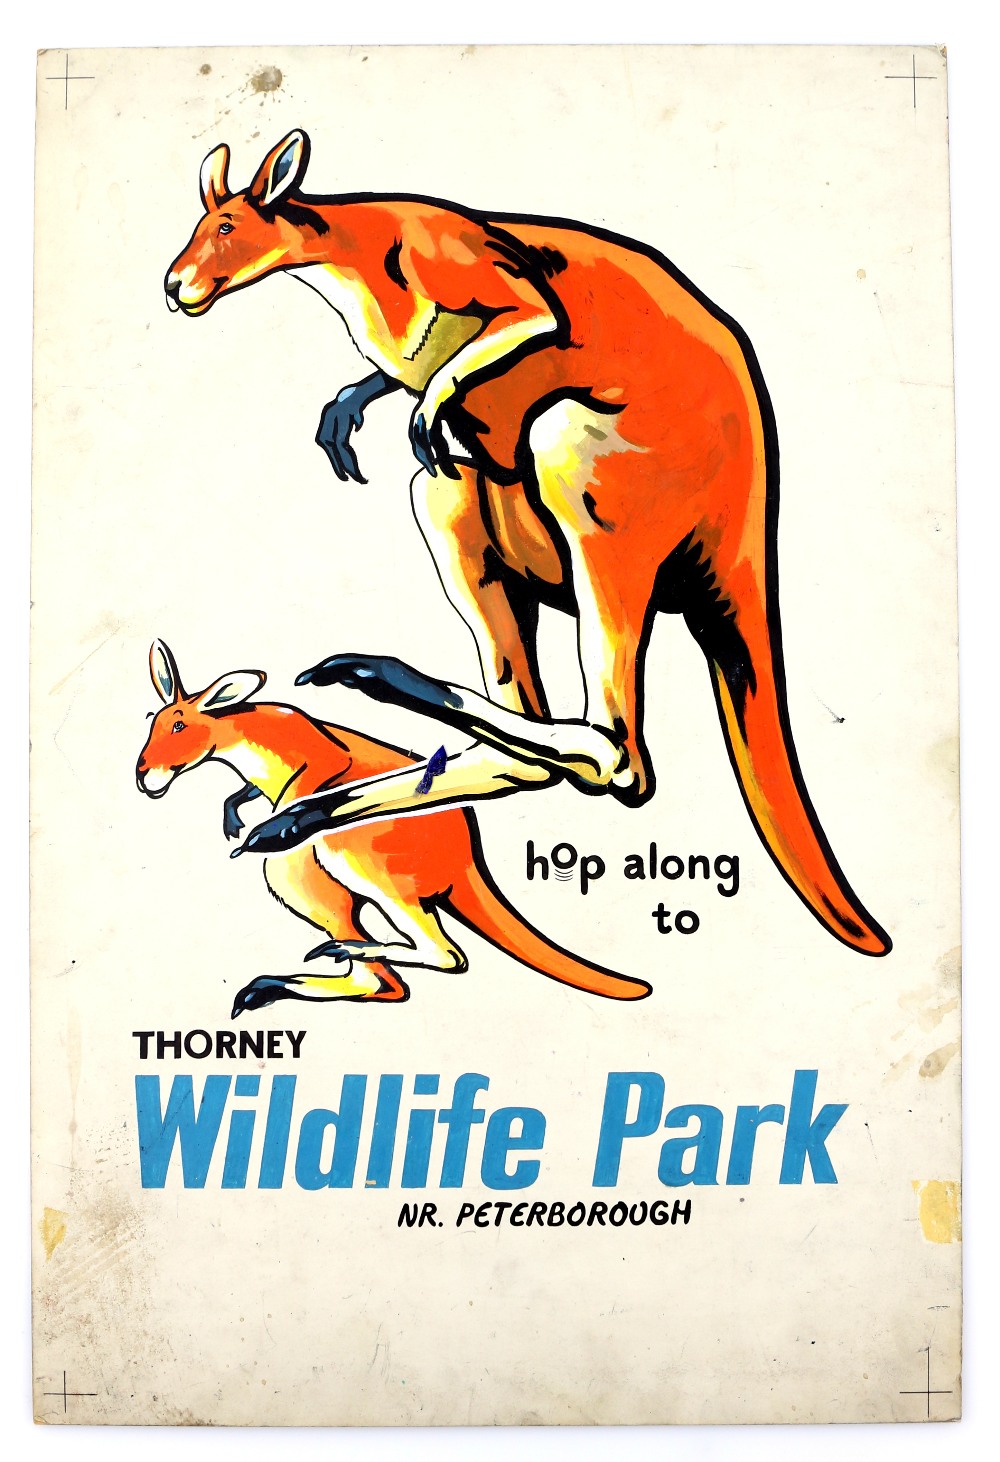 Thorney Wildlife Park - 'Hop along to', original hand painted poster artwork, on board, 46 x 32